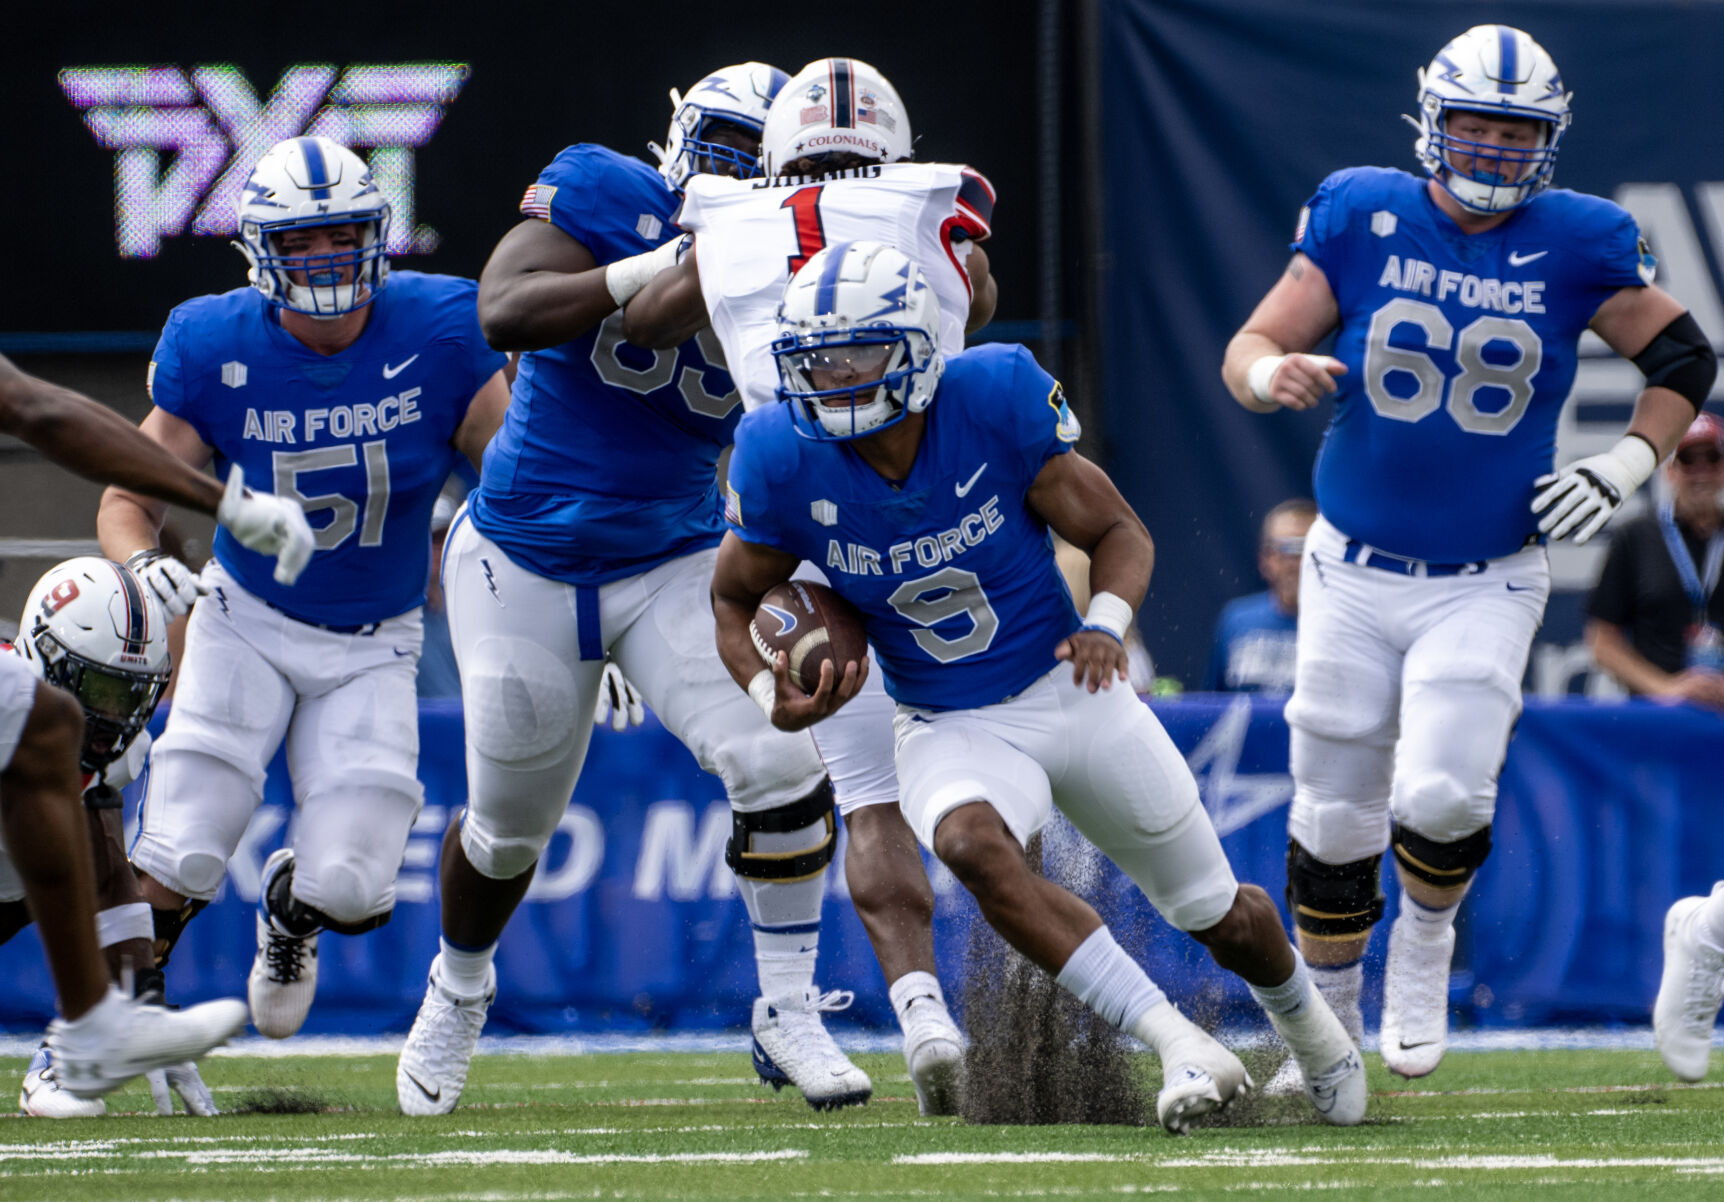 How to watch Air Force football at Sam Houston State on Saturday Air Force Sports gazette